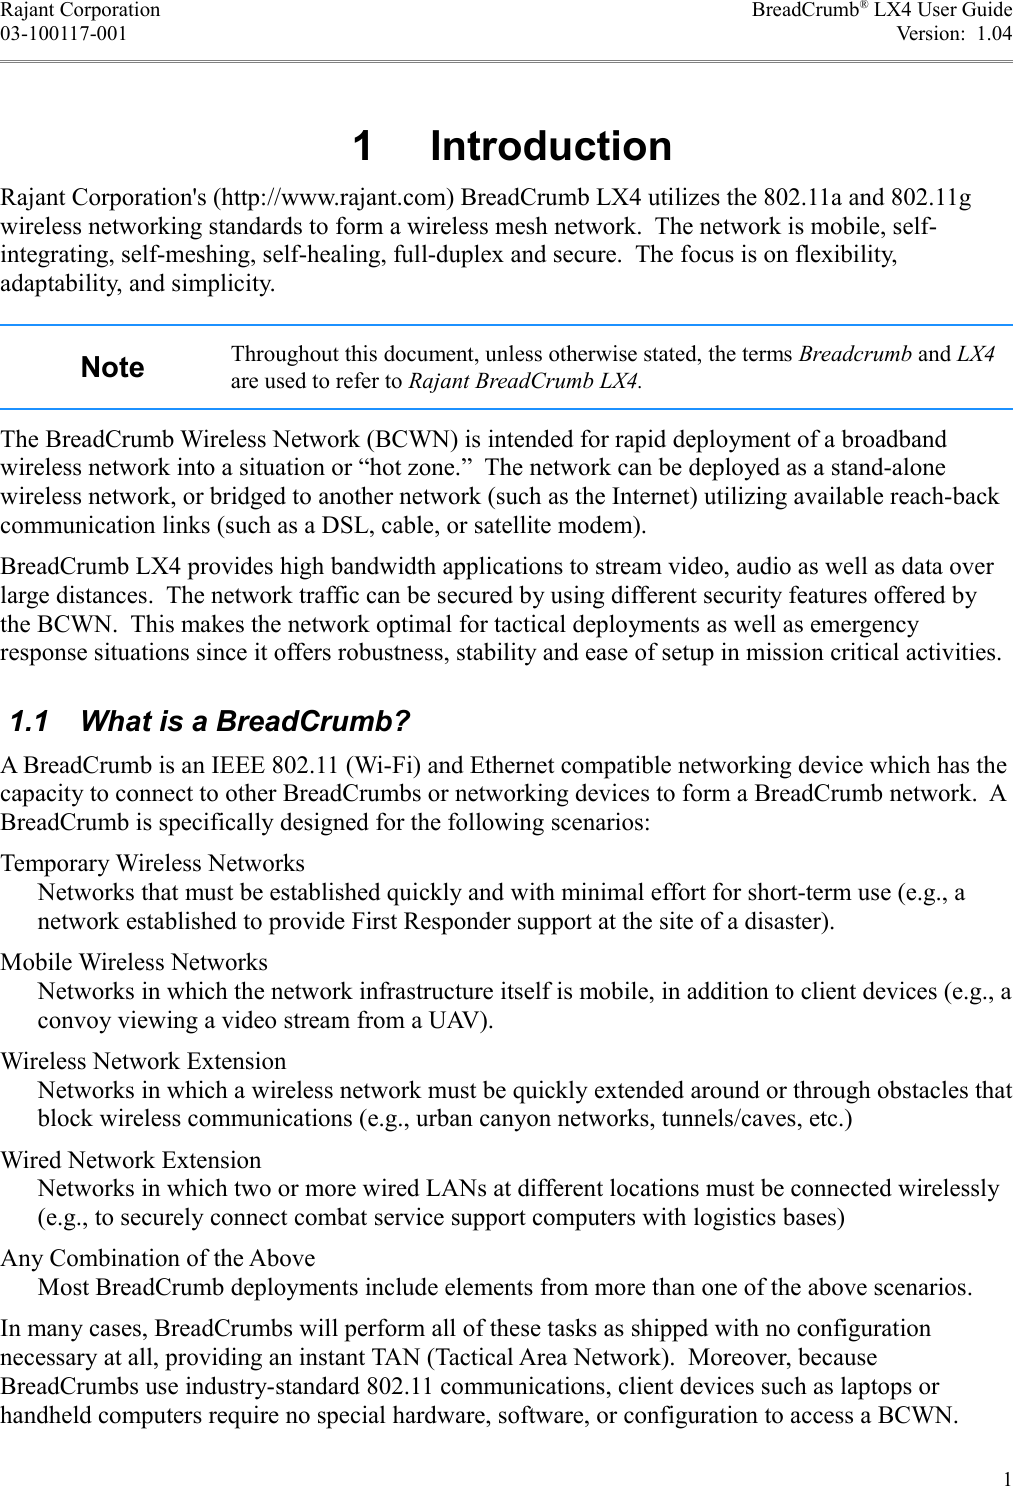 Rajant Corporation BreadCrumb® LX4 User Guide03-100117-001 Version:  1.04 1  IntroductionRajant Corporation&apos;s (http://www.rajant.com) BreadCrumb LX4 utilizes the 802.11a and 802.11g wireless networking standards to form a wireless mesh network.  The network is mobile, self-integrating, self-meshing, self-healing, full-duplex and secure.  The focus is on flexibility, adaptability, and simplicity.Note Throughout this document, unless otherwise stated, the terms Breadcrumb and LX4 are used to refer to Rajant BreadCrumb LX4.The BreadCrumb Wireless Network (BCWN) is intended for rapid deployment of a broadband wireless network into a situation or “hot zone.”  The network can be deployed as a stand-alone wireless network, or bridged to another network (such as the Internet) utilizing available reach-back communication links (such as a DSL, cable, or satellite modem).BreadCrumb LX4 provides high bandwidth applications to stream video, audio as well as data over large distances.  The network traffic can be secured by using different security features offered by the BCWN.  This makes the network optimal for tactical deployments as well as emergency response situations since it offers robustness, stability and ease of setup in mission critical activities. 1.1  What is a BreadCrumb?A BreadCrumb is an IEEE 802.11 (Wi-Fi) and Ethernet compatible networking device which has the capacity to connect to other BreadCrumbs or networking devices to form a BreadCrumb network.  A BreadCrumb is specifically designed for the following scenarios:Temporary Wireless NetworksNetworks that must be established quickly and with minimal effort for short-term use (e.g., a network established to provide First Responder support at the site of a disaster).Mobile Wireless NetworksNetworks in which the network infrastructure itself is mobile, in addition to client devices (e.g., a convoy viewing a video stream from a UAV).Wireless Network ExtensionNetworks in which a wireless network must be quickly extended around or through obstacles that block wireless communications (e.g., urban canyon networks, tunnels/caves, etc.)Wired Network ExtensionNetworks in which two or more wired LANs at different locations must be connected wirelessly (e.g., to securely connect combat service support computers with logistics bases)Any Combination of the AboveMost BreadCrumb deployments include elements from more than one of the above scenarios.In many cases, BreadCrumbs will perform all of these tasks as shipped with no configuration necessary at all, providing an instant TAN (Tactical Area Network).  Moreover, because BreadCrumbs use industry-standard 802.11 communications, client devices such as laptops or handheld computers require no special hardware, software, or configuration to access a BCWN.1